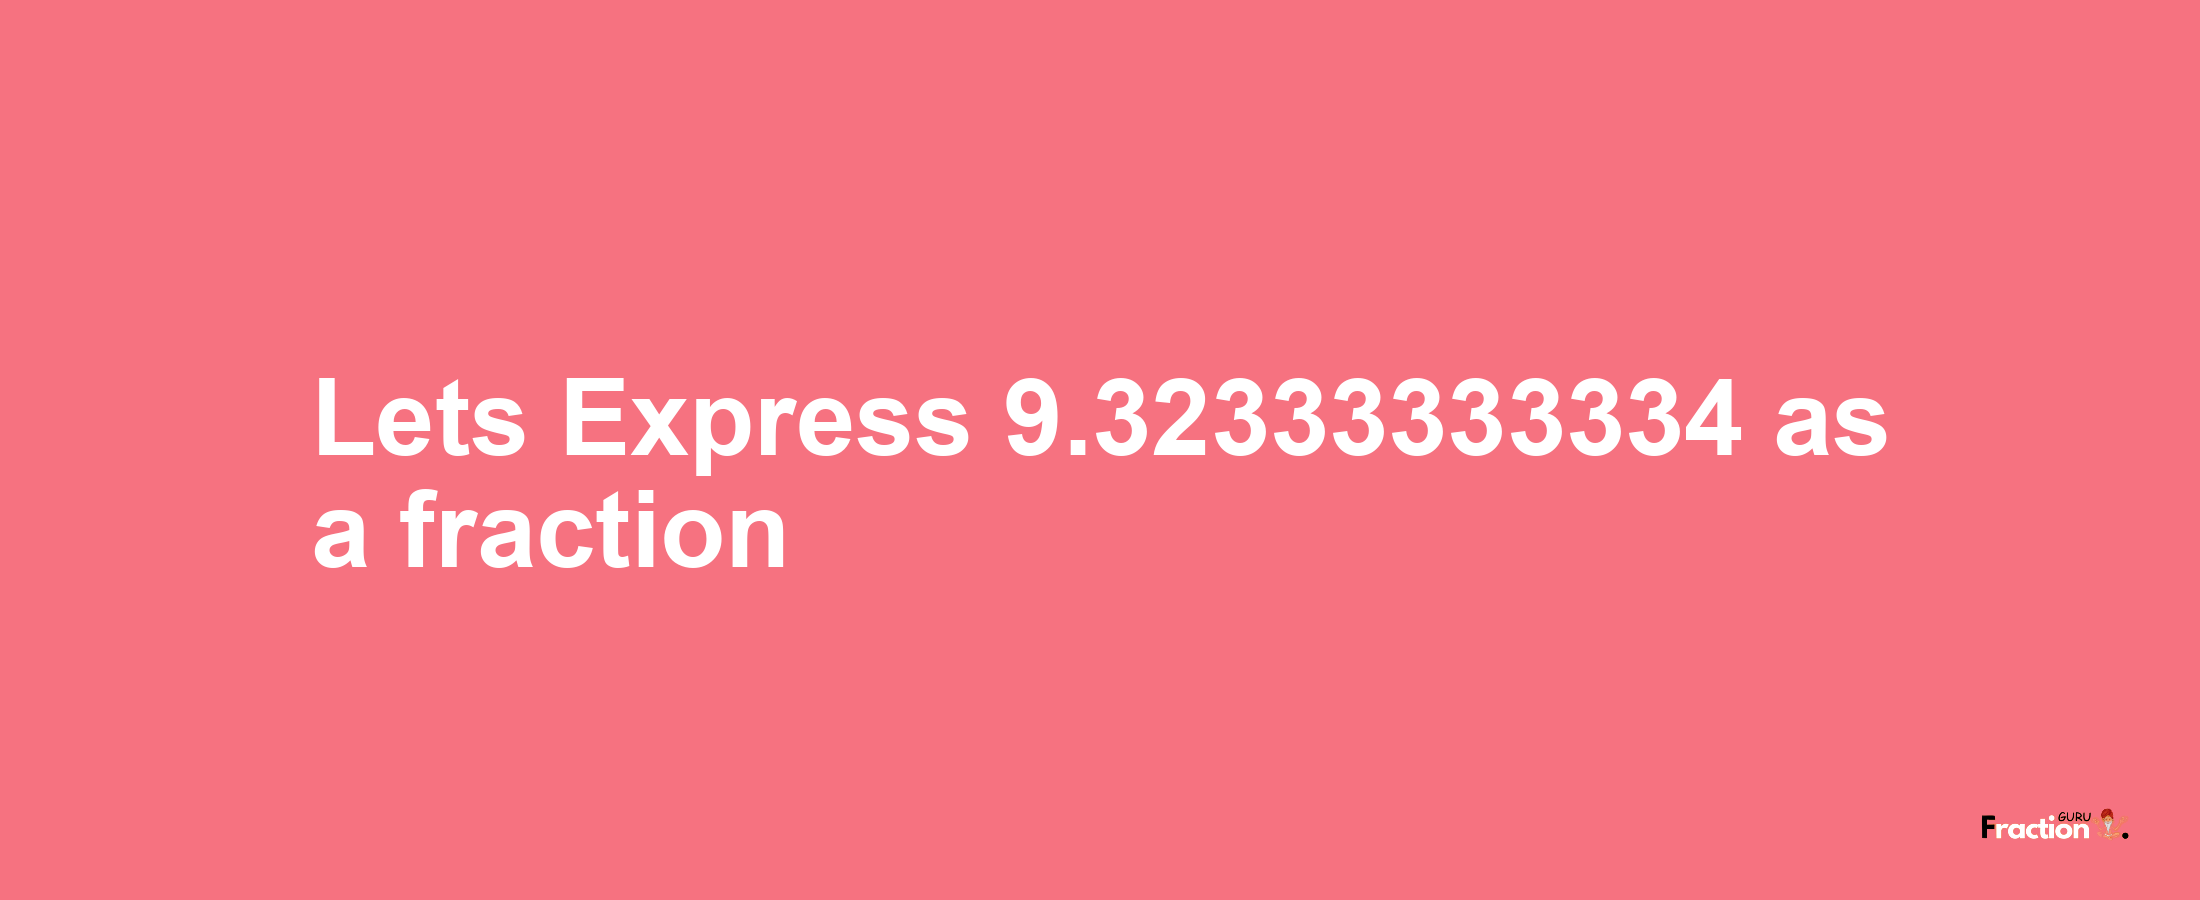 Lets Express 9.32333333334 as afraction